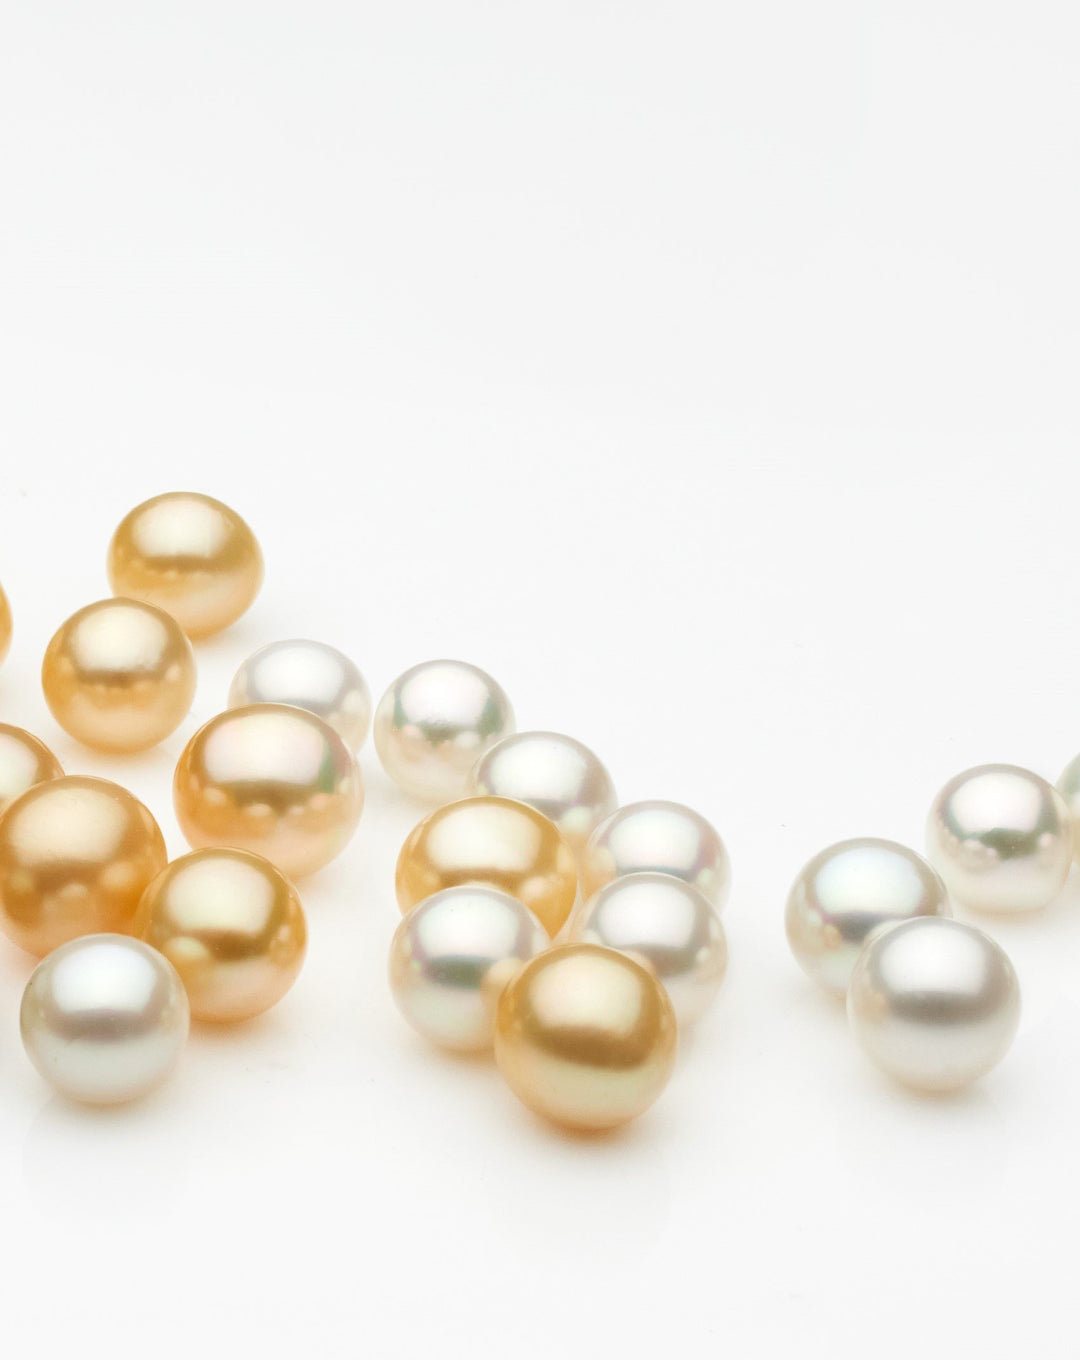 How to spot Fake Pearls: Complete Guide